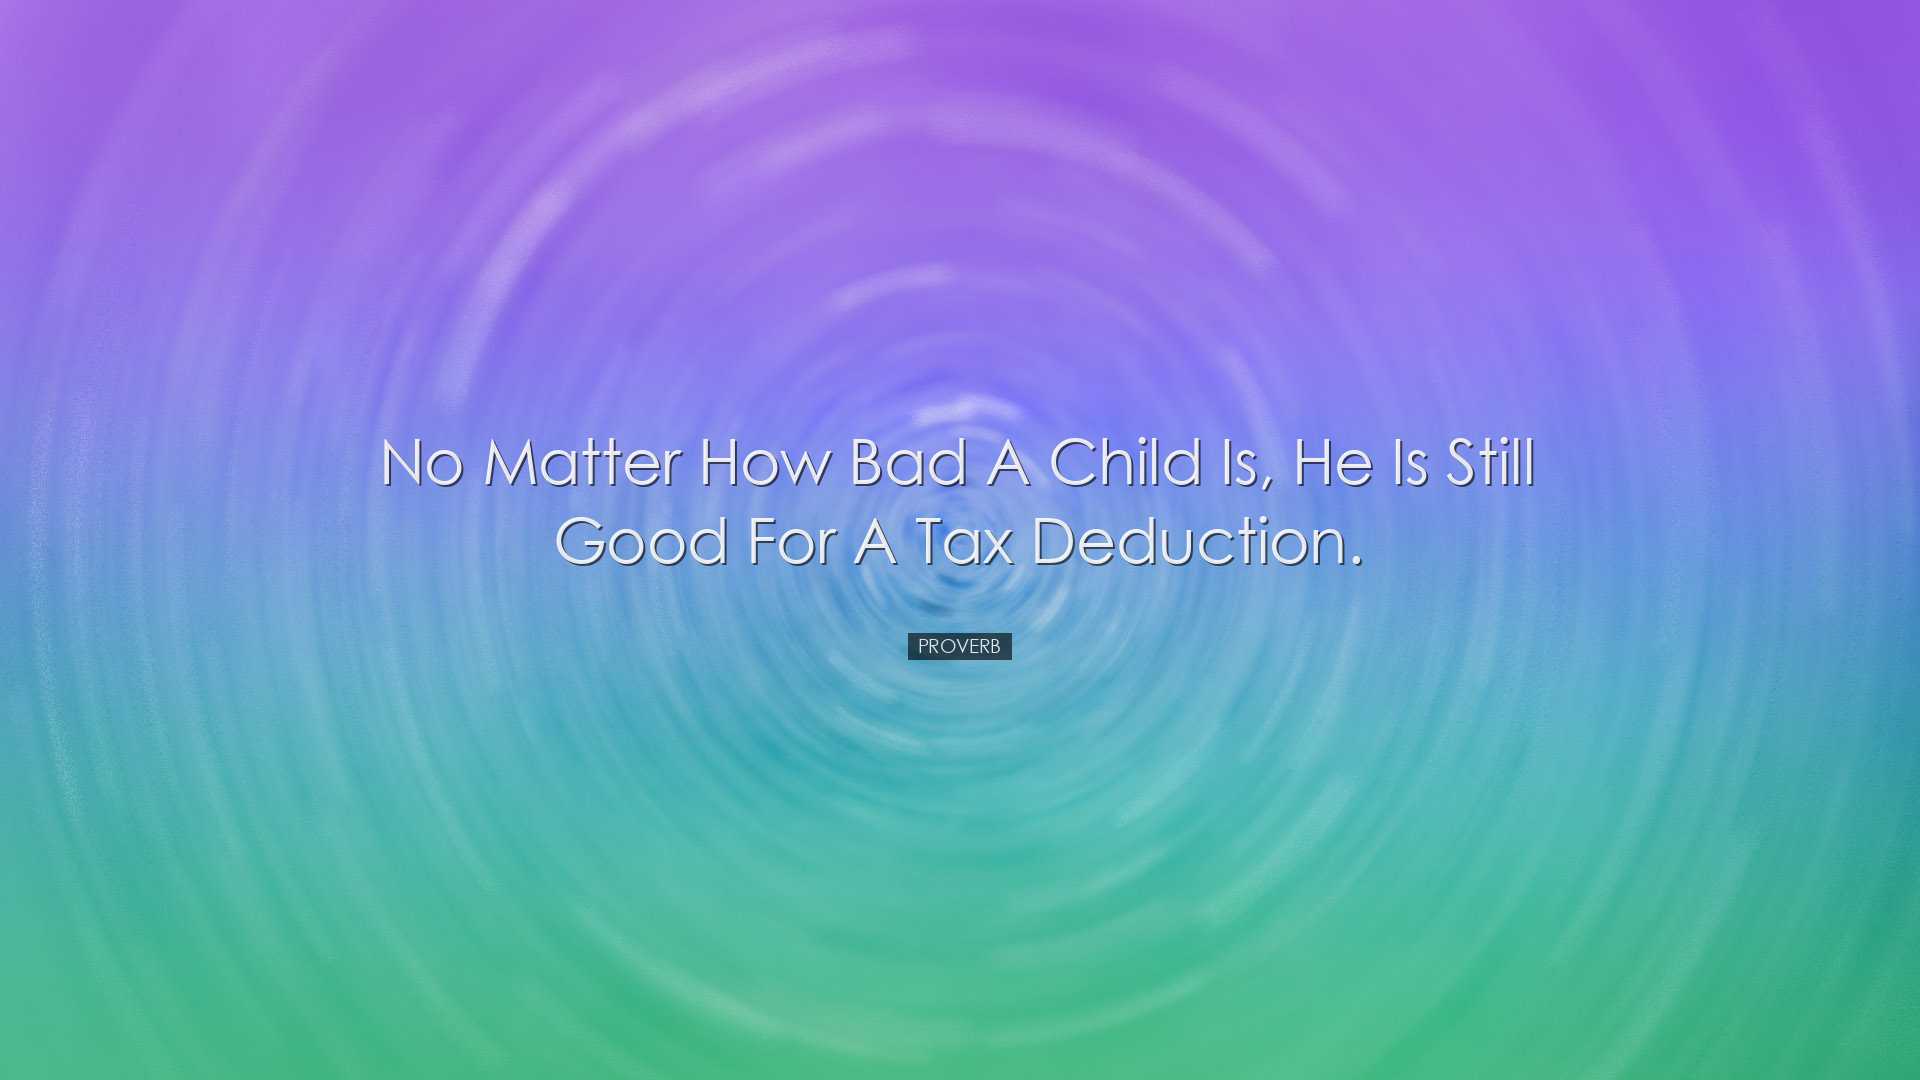 No matter how bad a child is, he is still good for a tax deduction